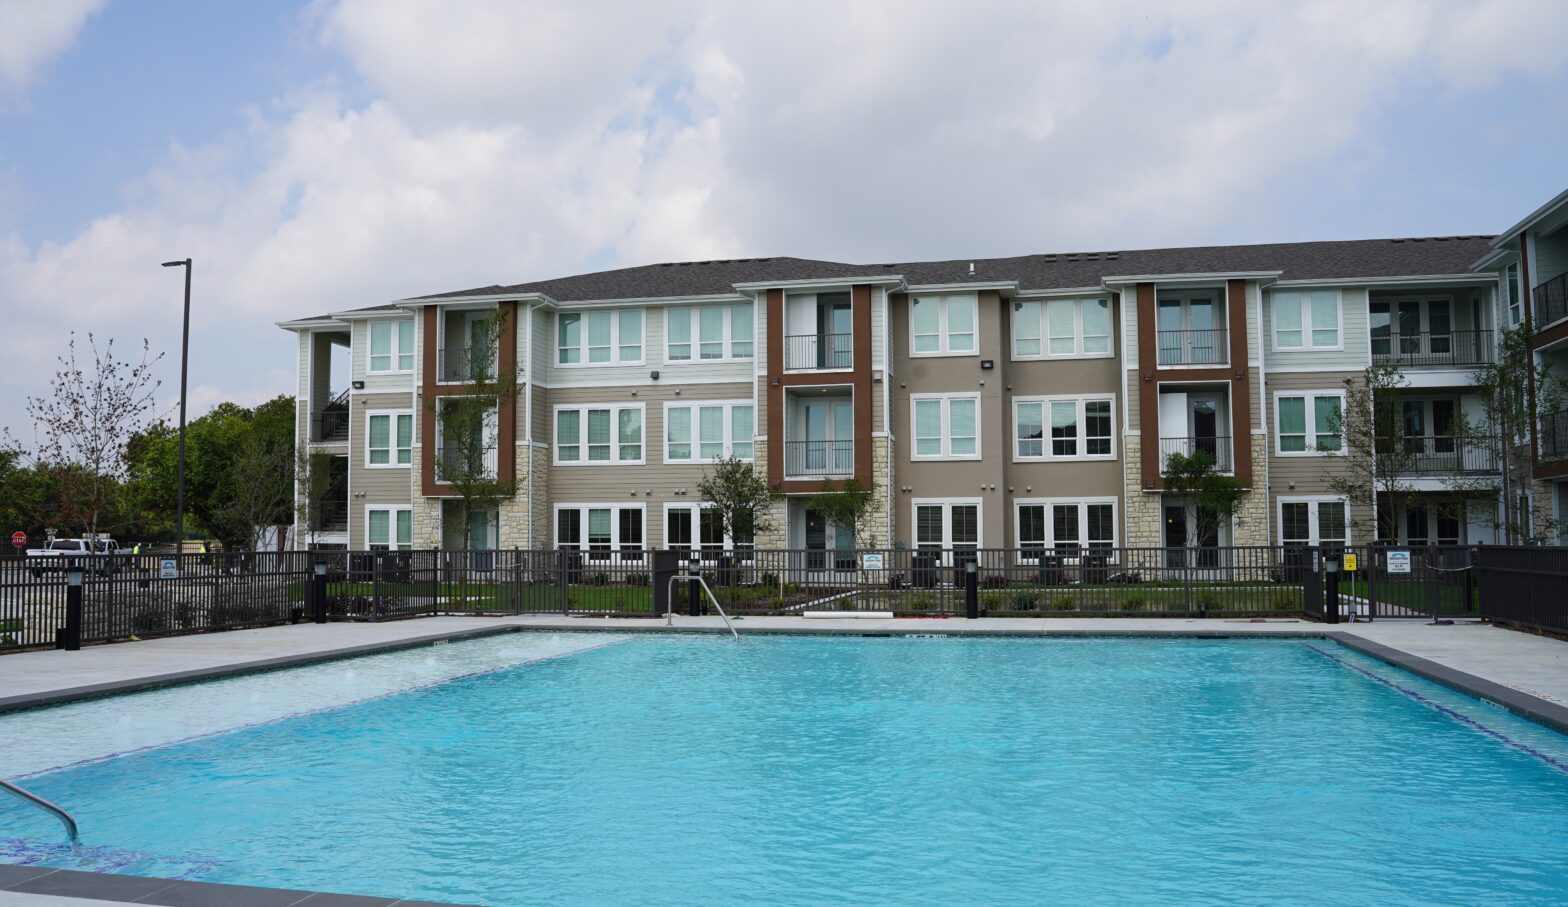 Green Oaks Apartments view from large pool